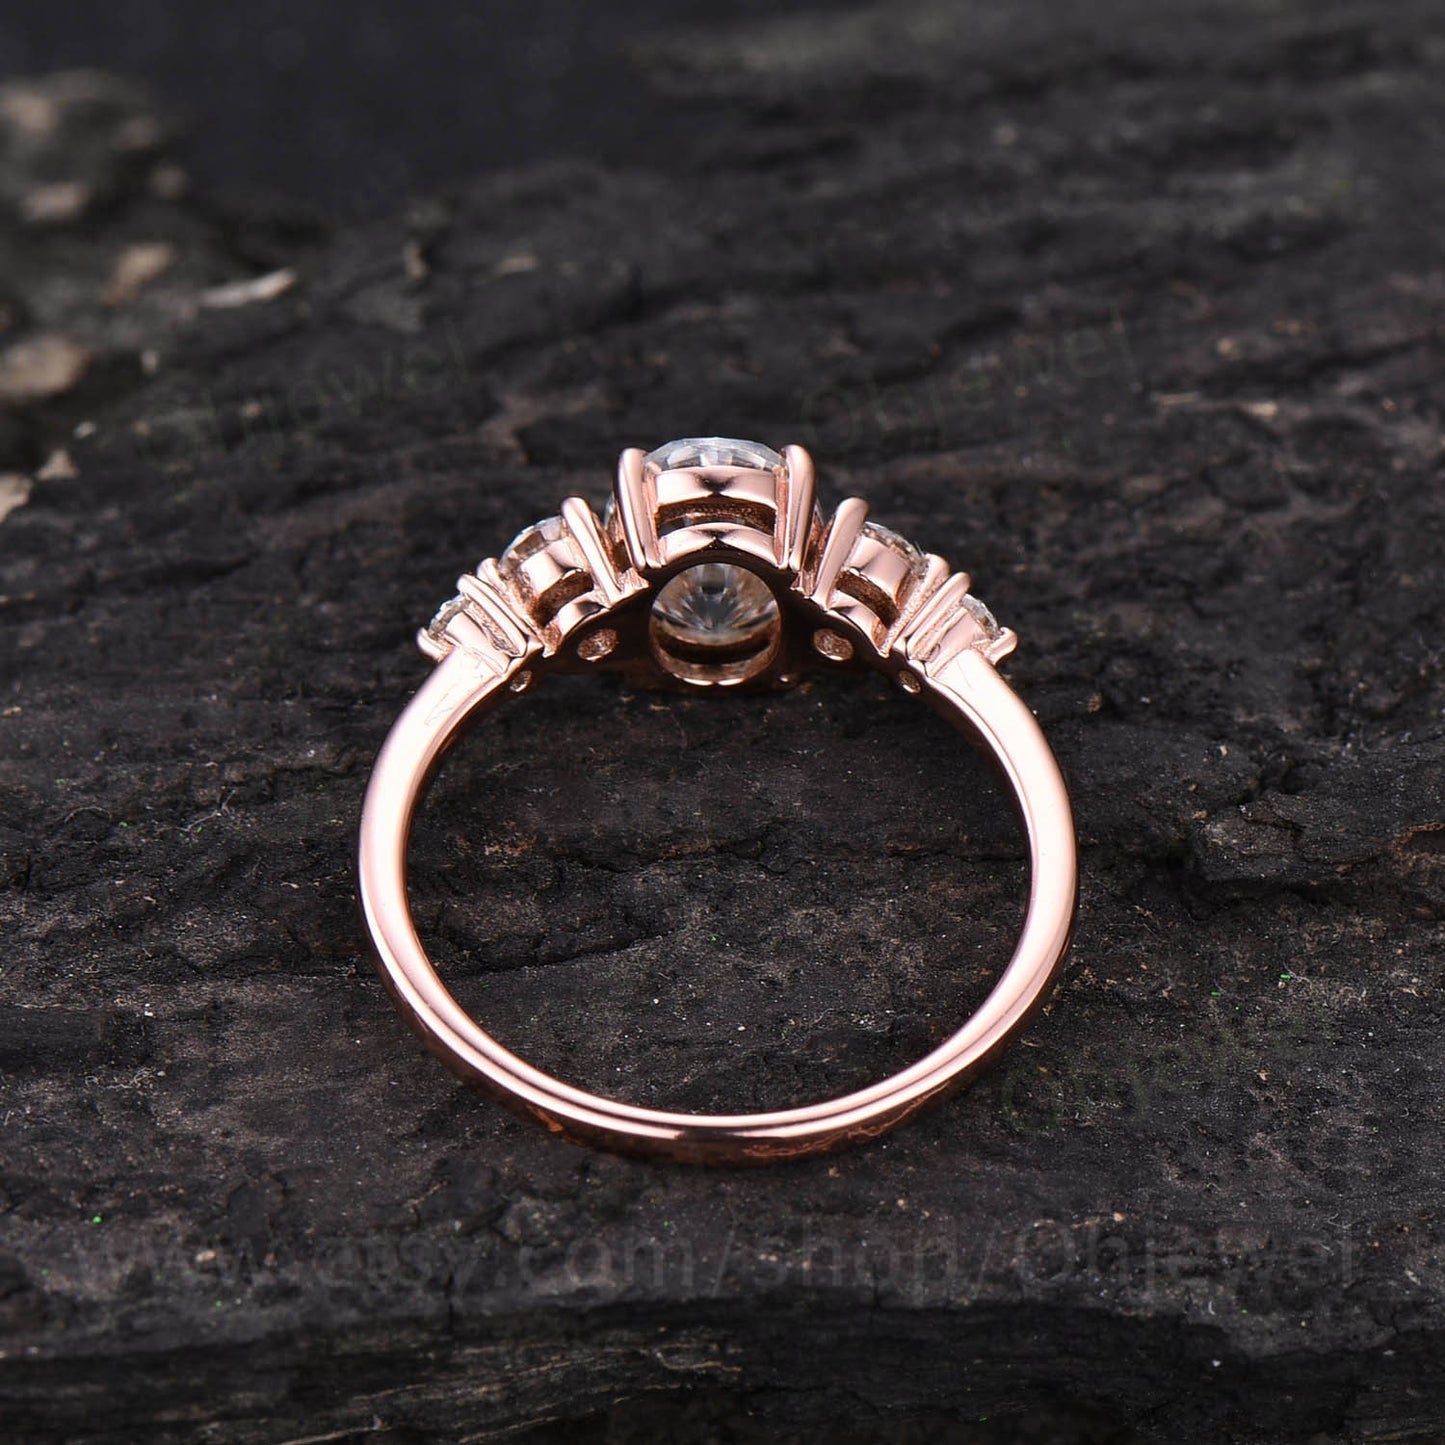 Moissanite engagement ring vintage oval five stone moissanite ring minimalist personalized dainty ring for women rose gold sterling silver